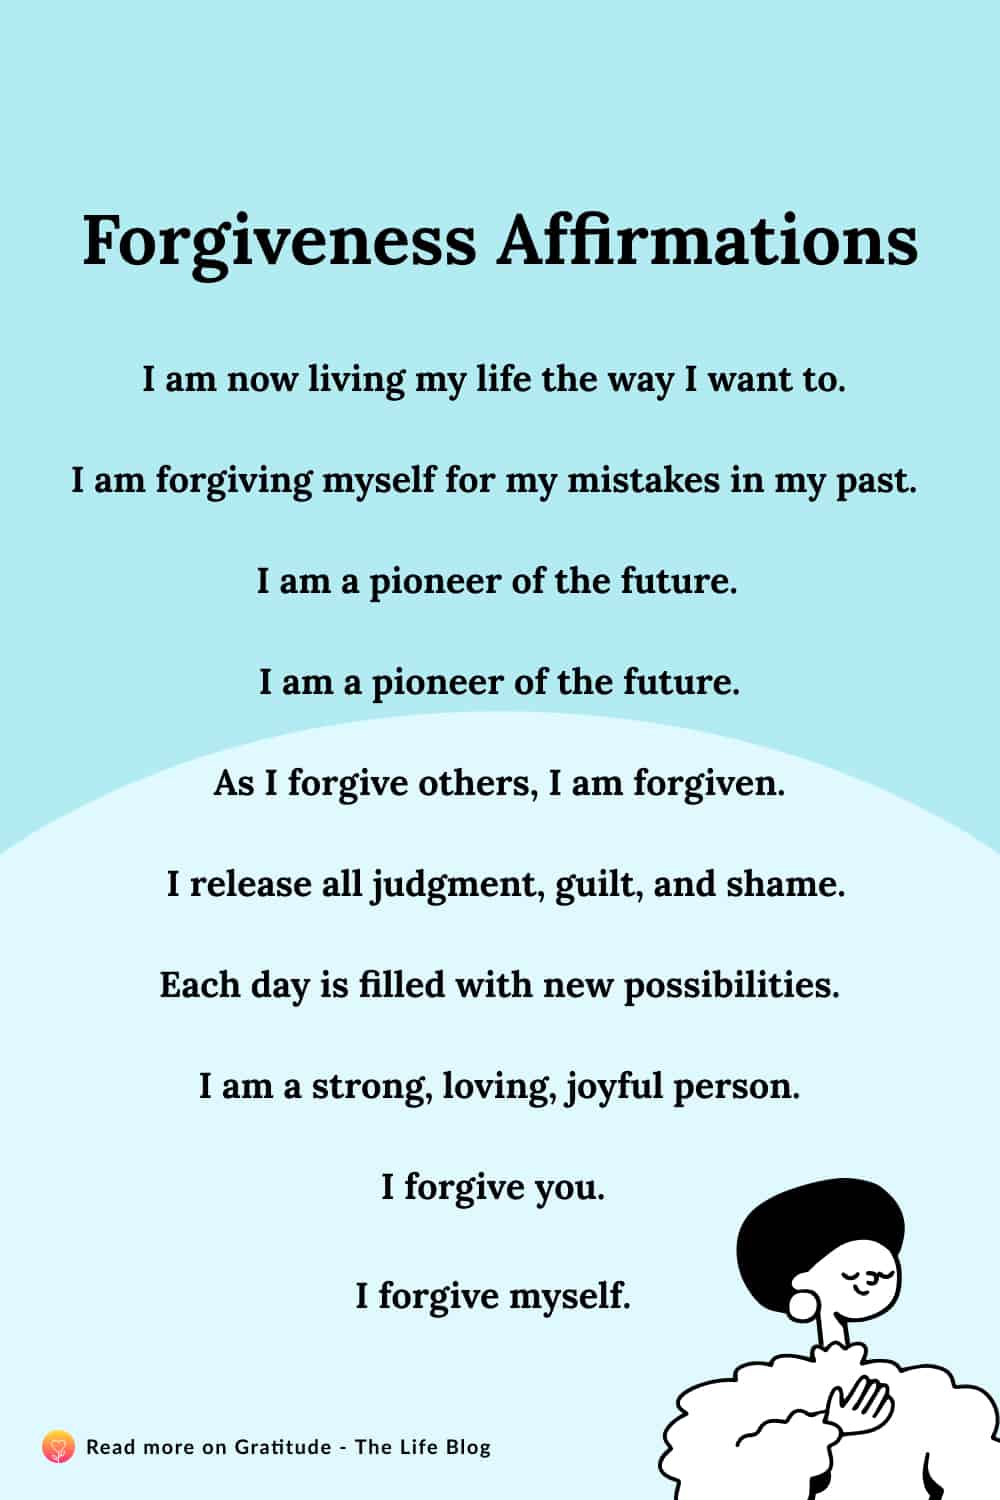 Image with list of forgiveness affirmations